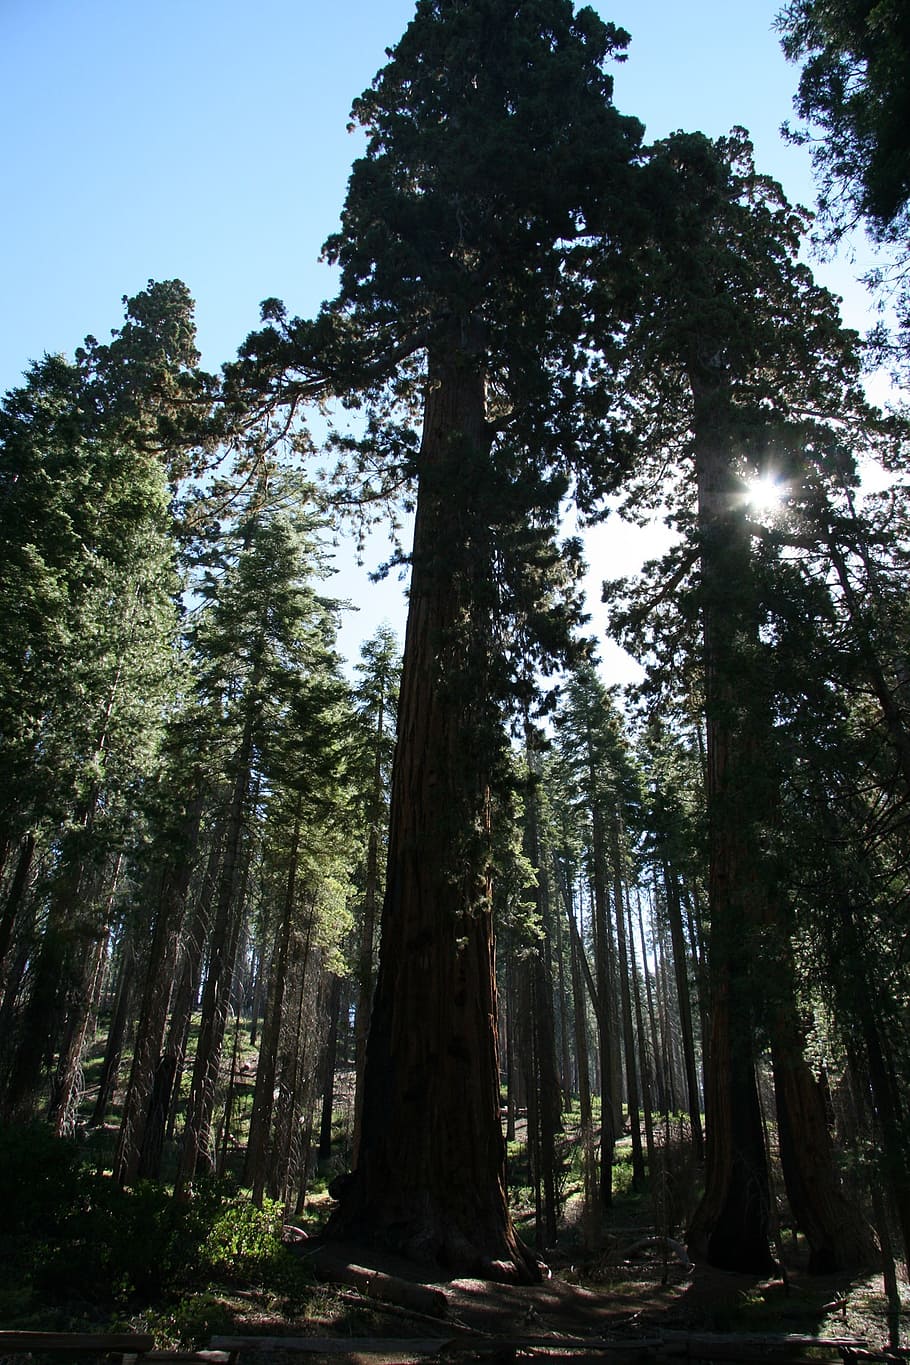 redwood, trees, giant, yosemite, park, natural, national, tall, scenic, environment